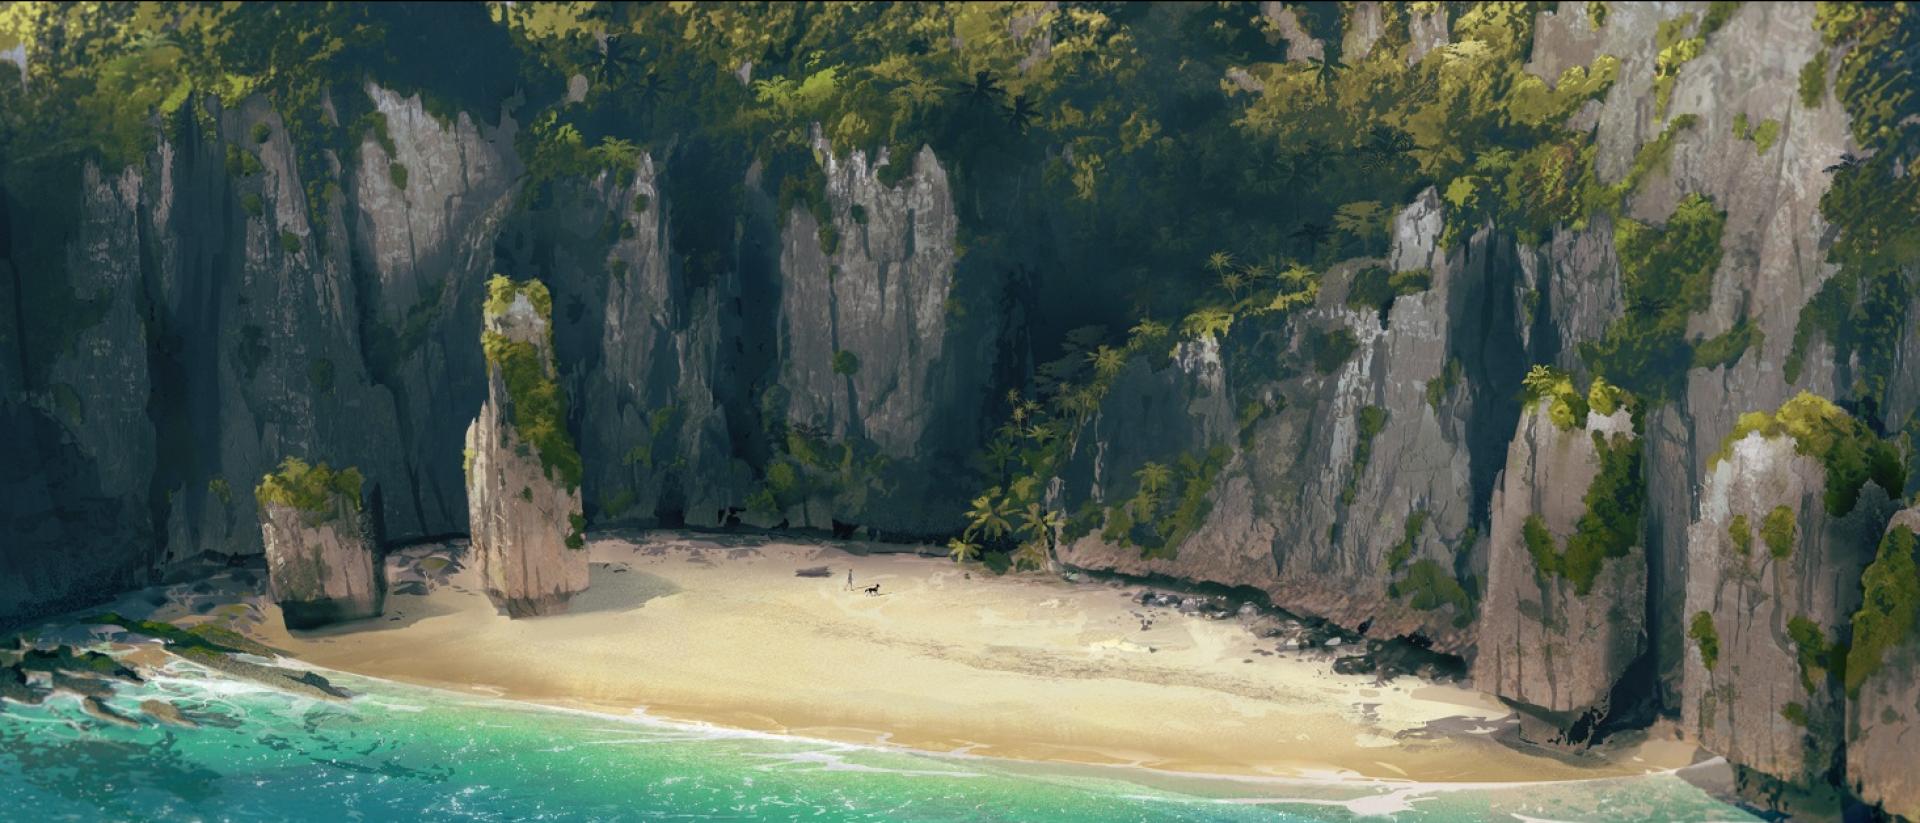 still from chuck chuck baby featuring a beach bay overlooked by jungle cliffs